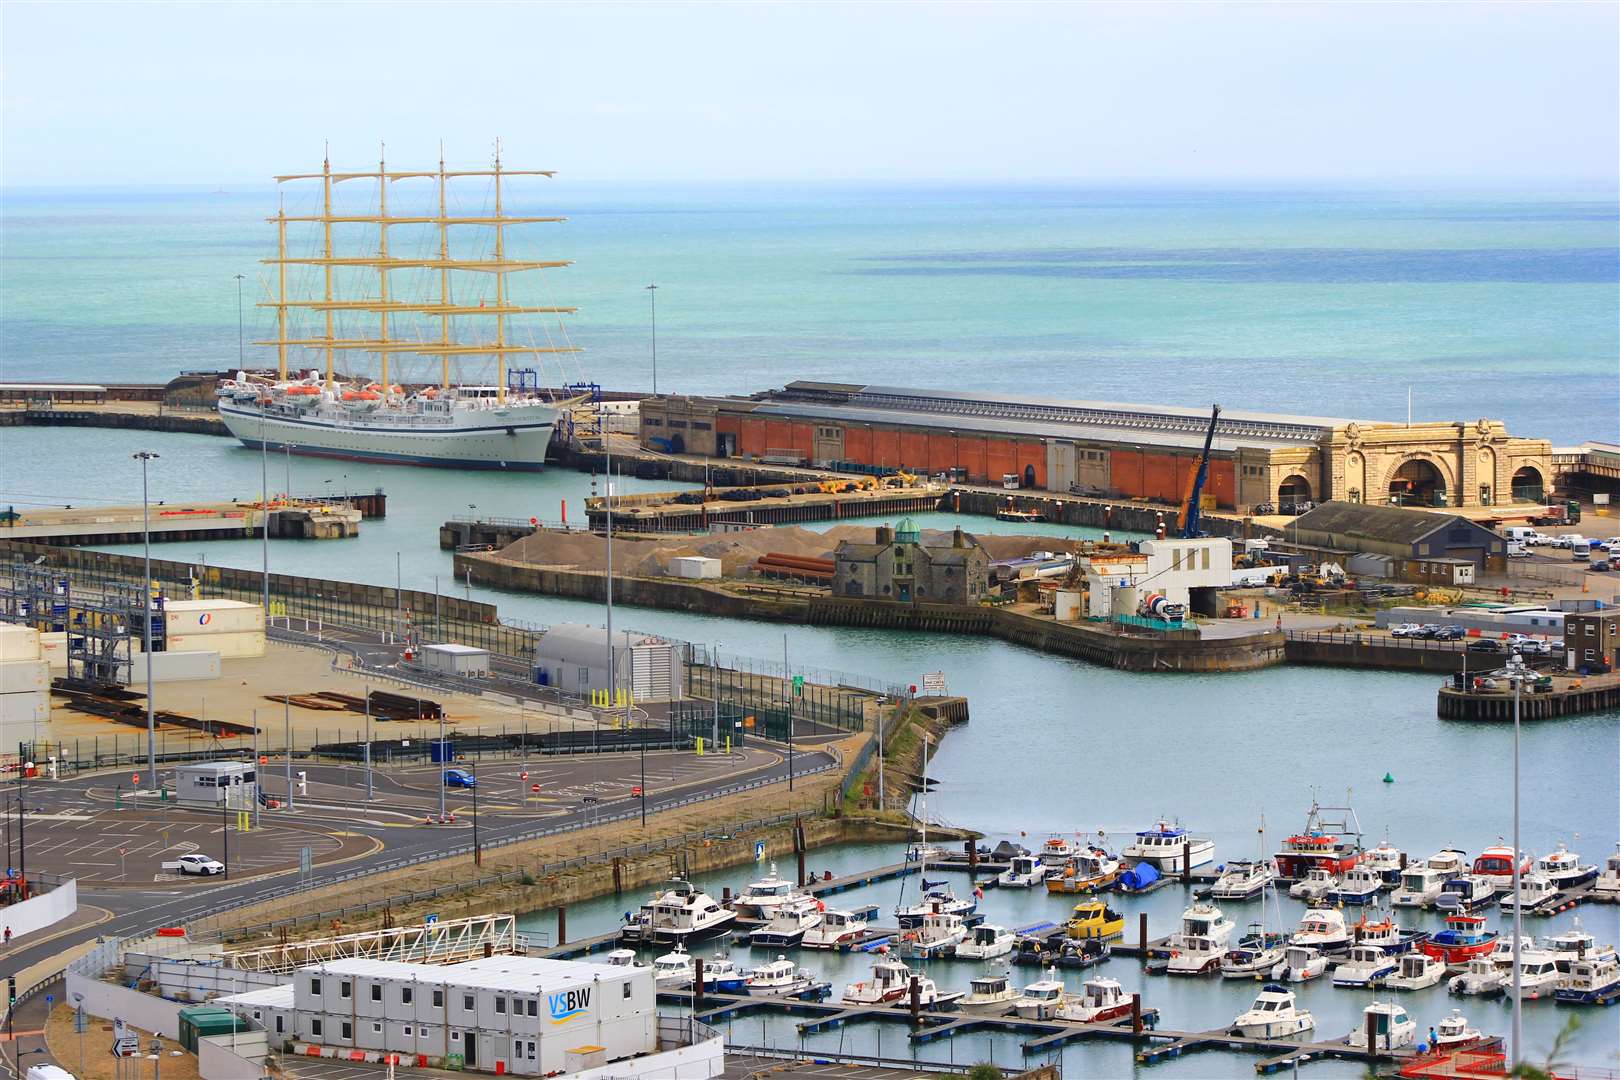 The Golden Horizon towering above all the other boats in Dover's harbour